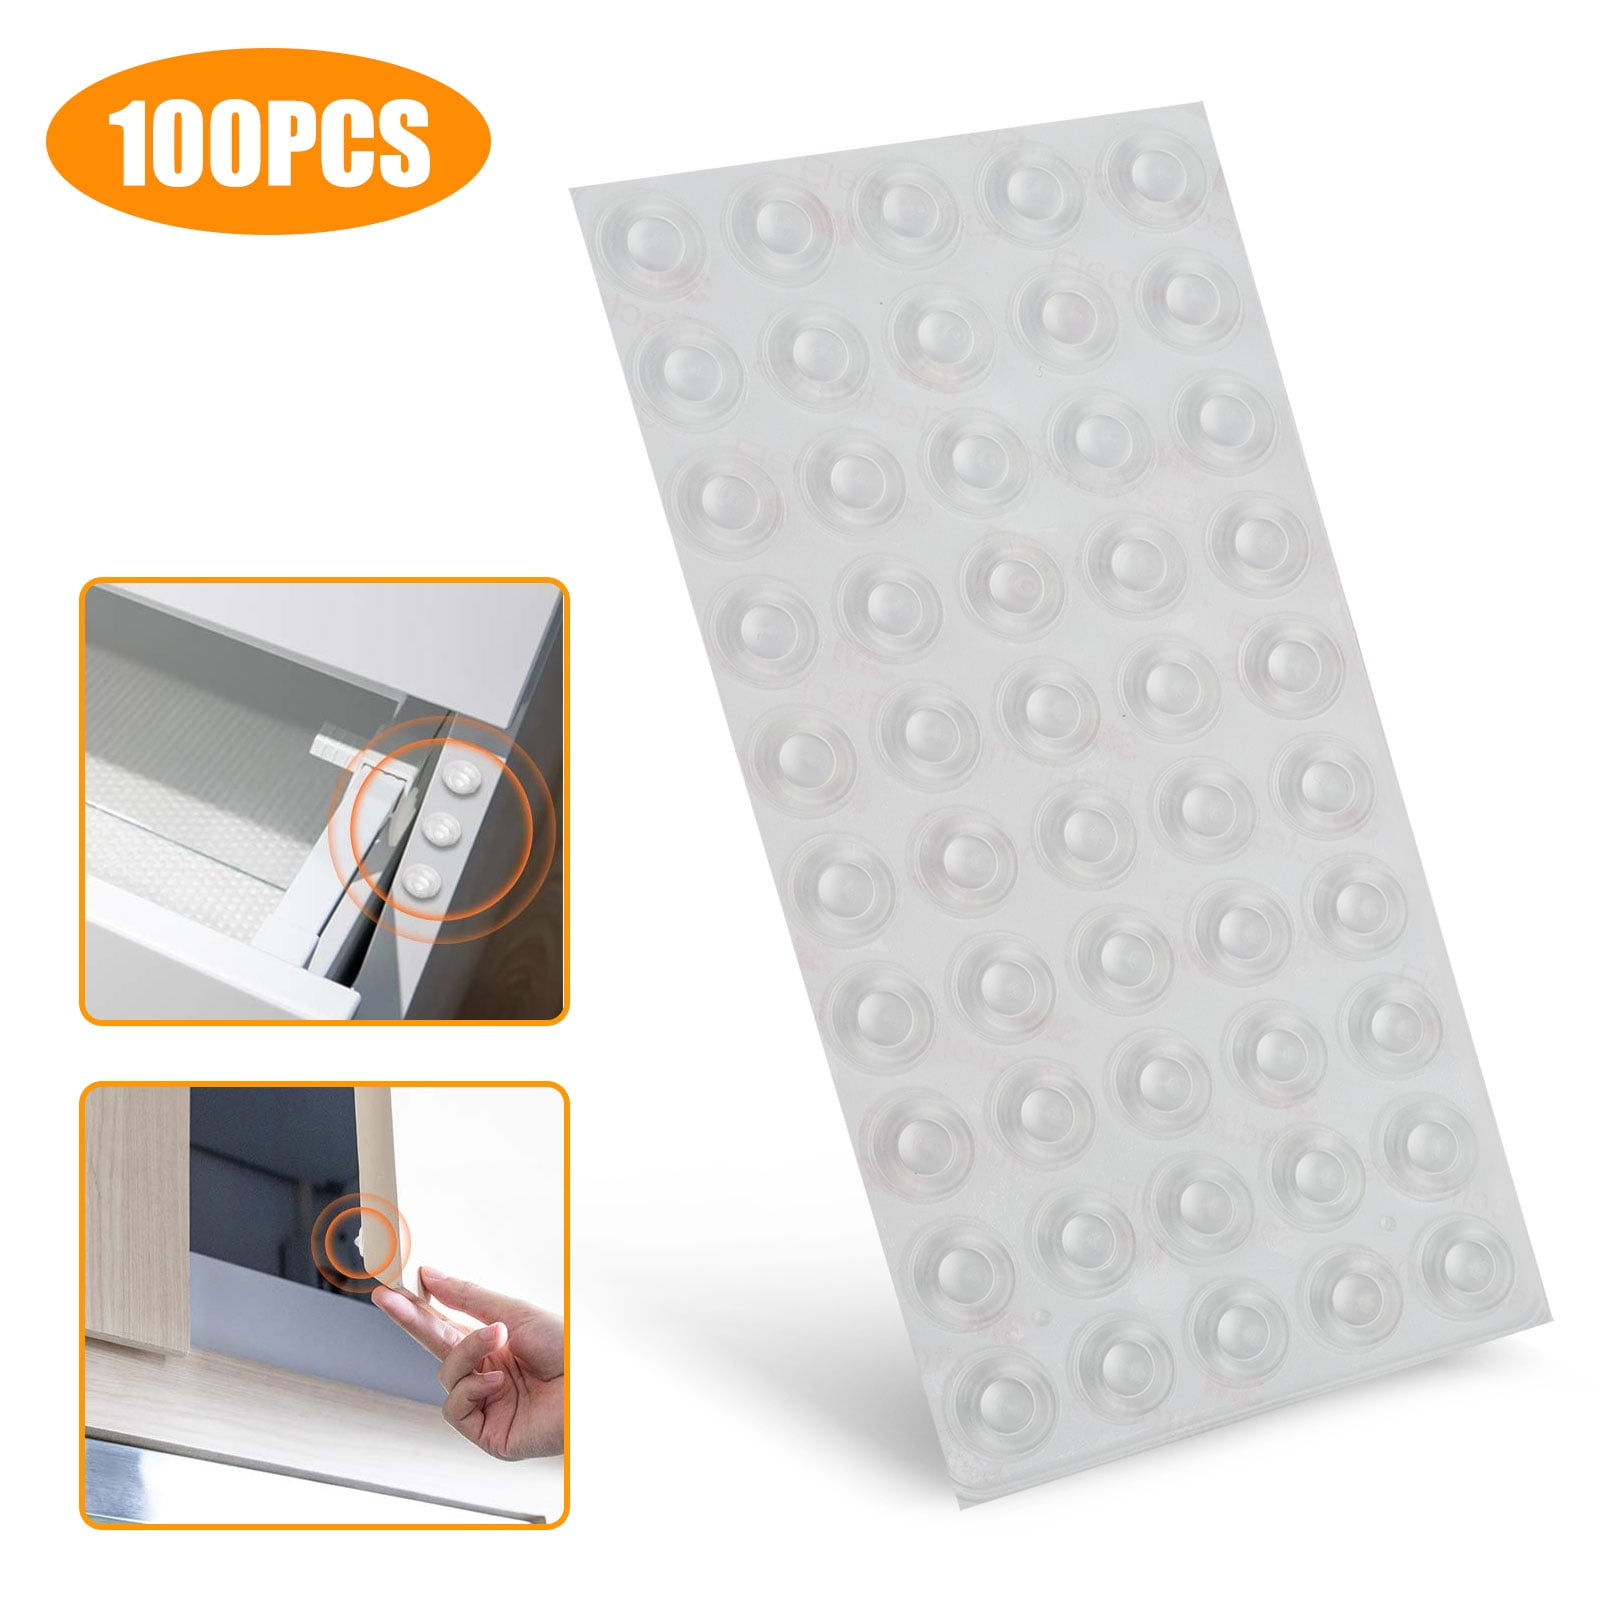 100Pcs Self  Silicone Feet Bumpers Door Cup Drawer Cabinet Kitc PV